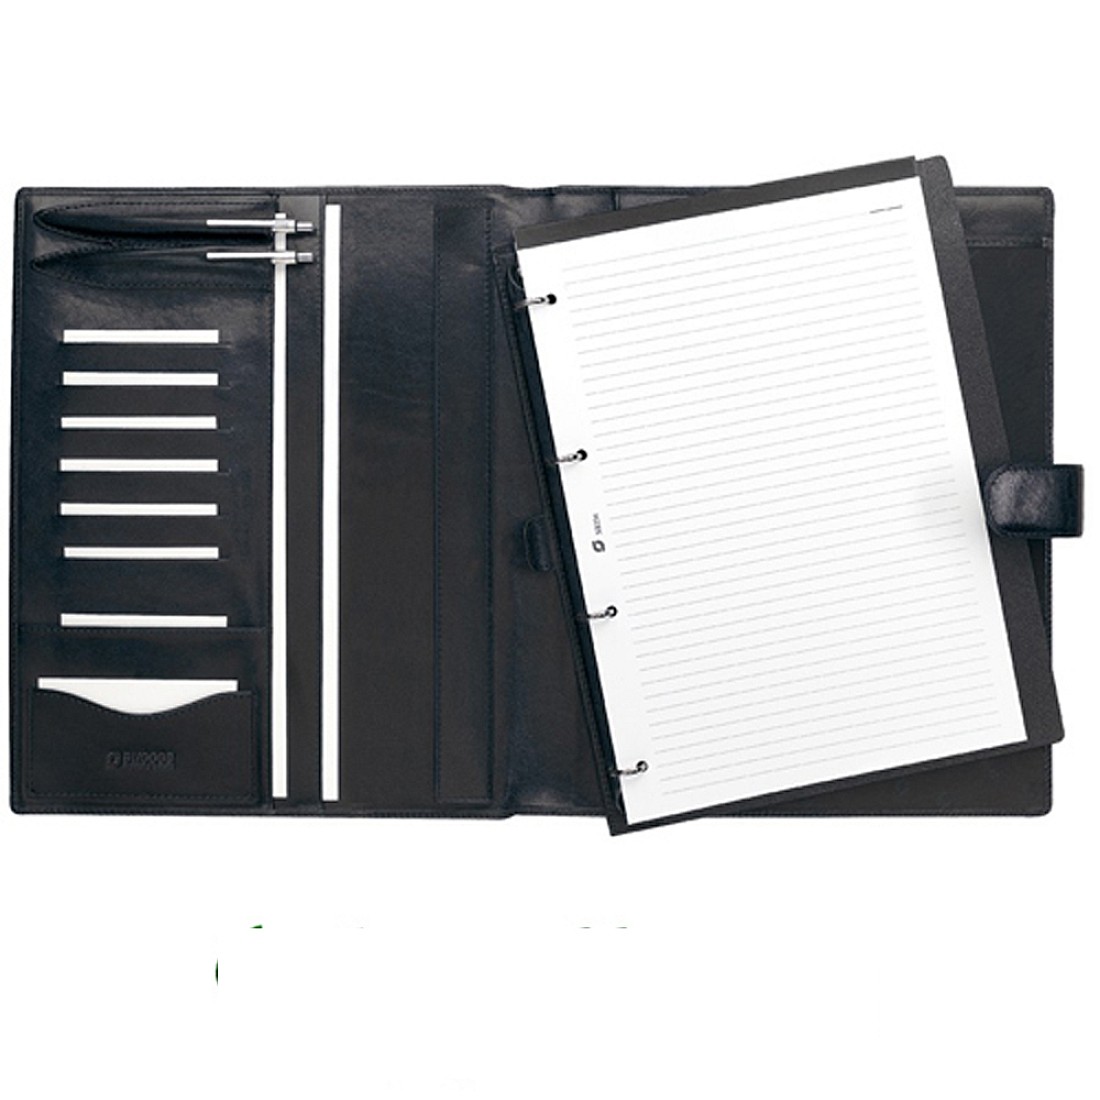 Succes Deluxe Black A4 Luxury Writing Case